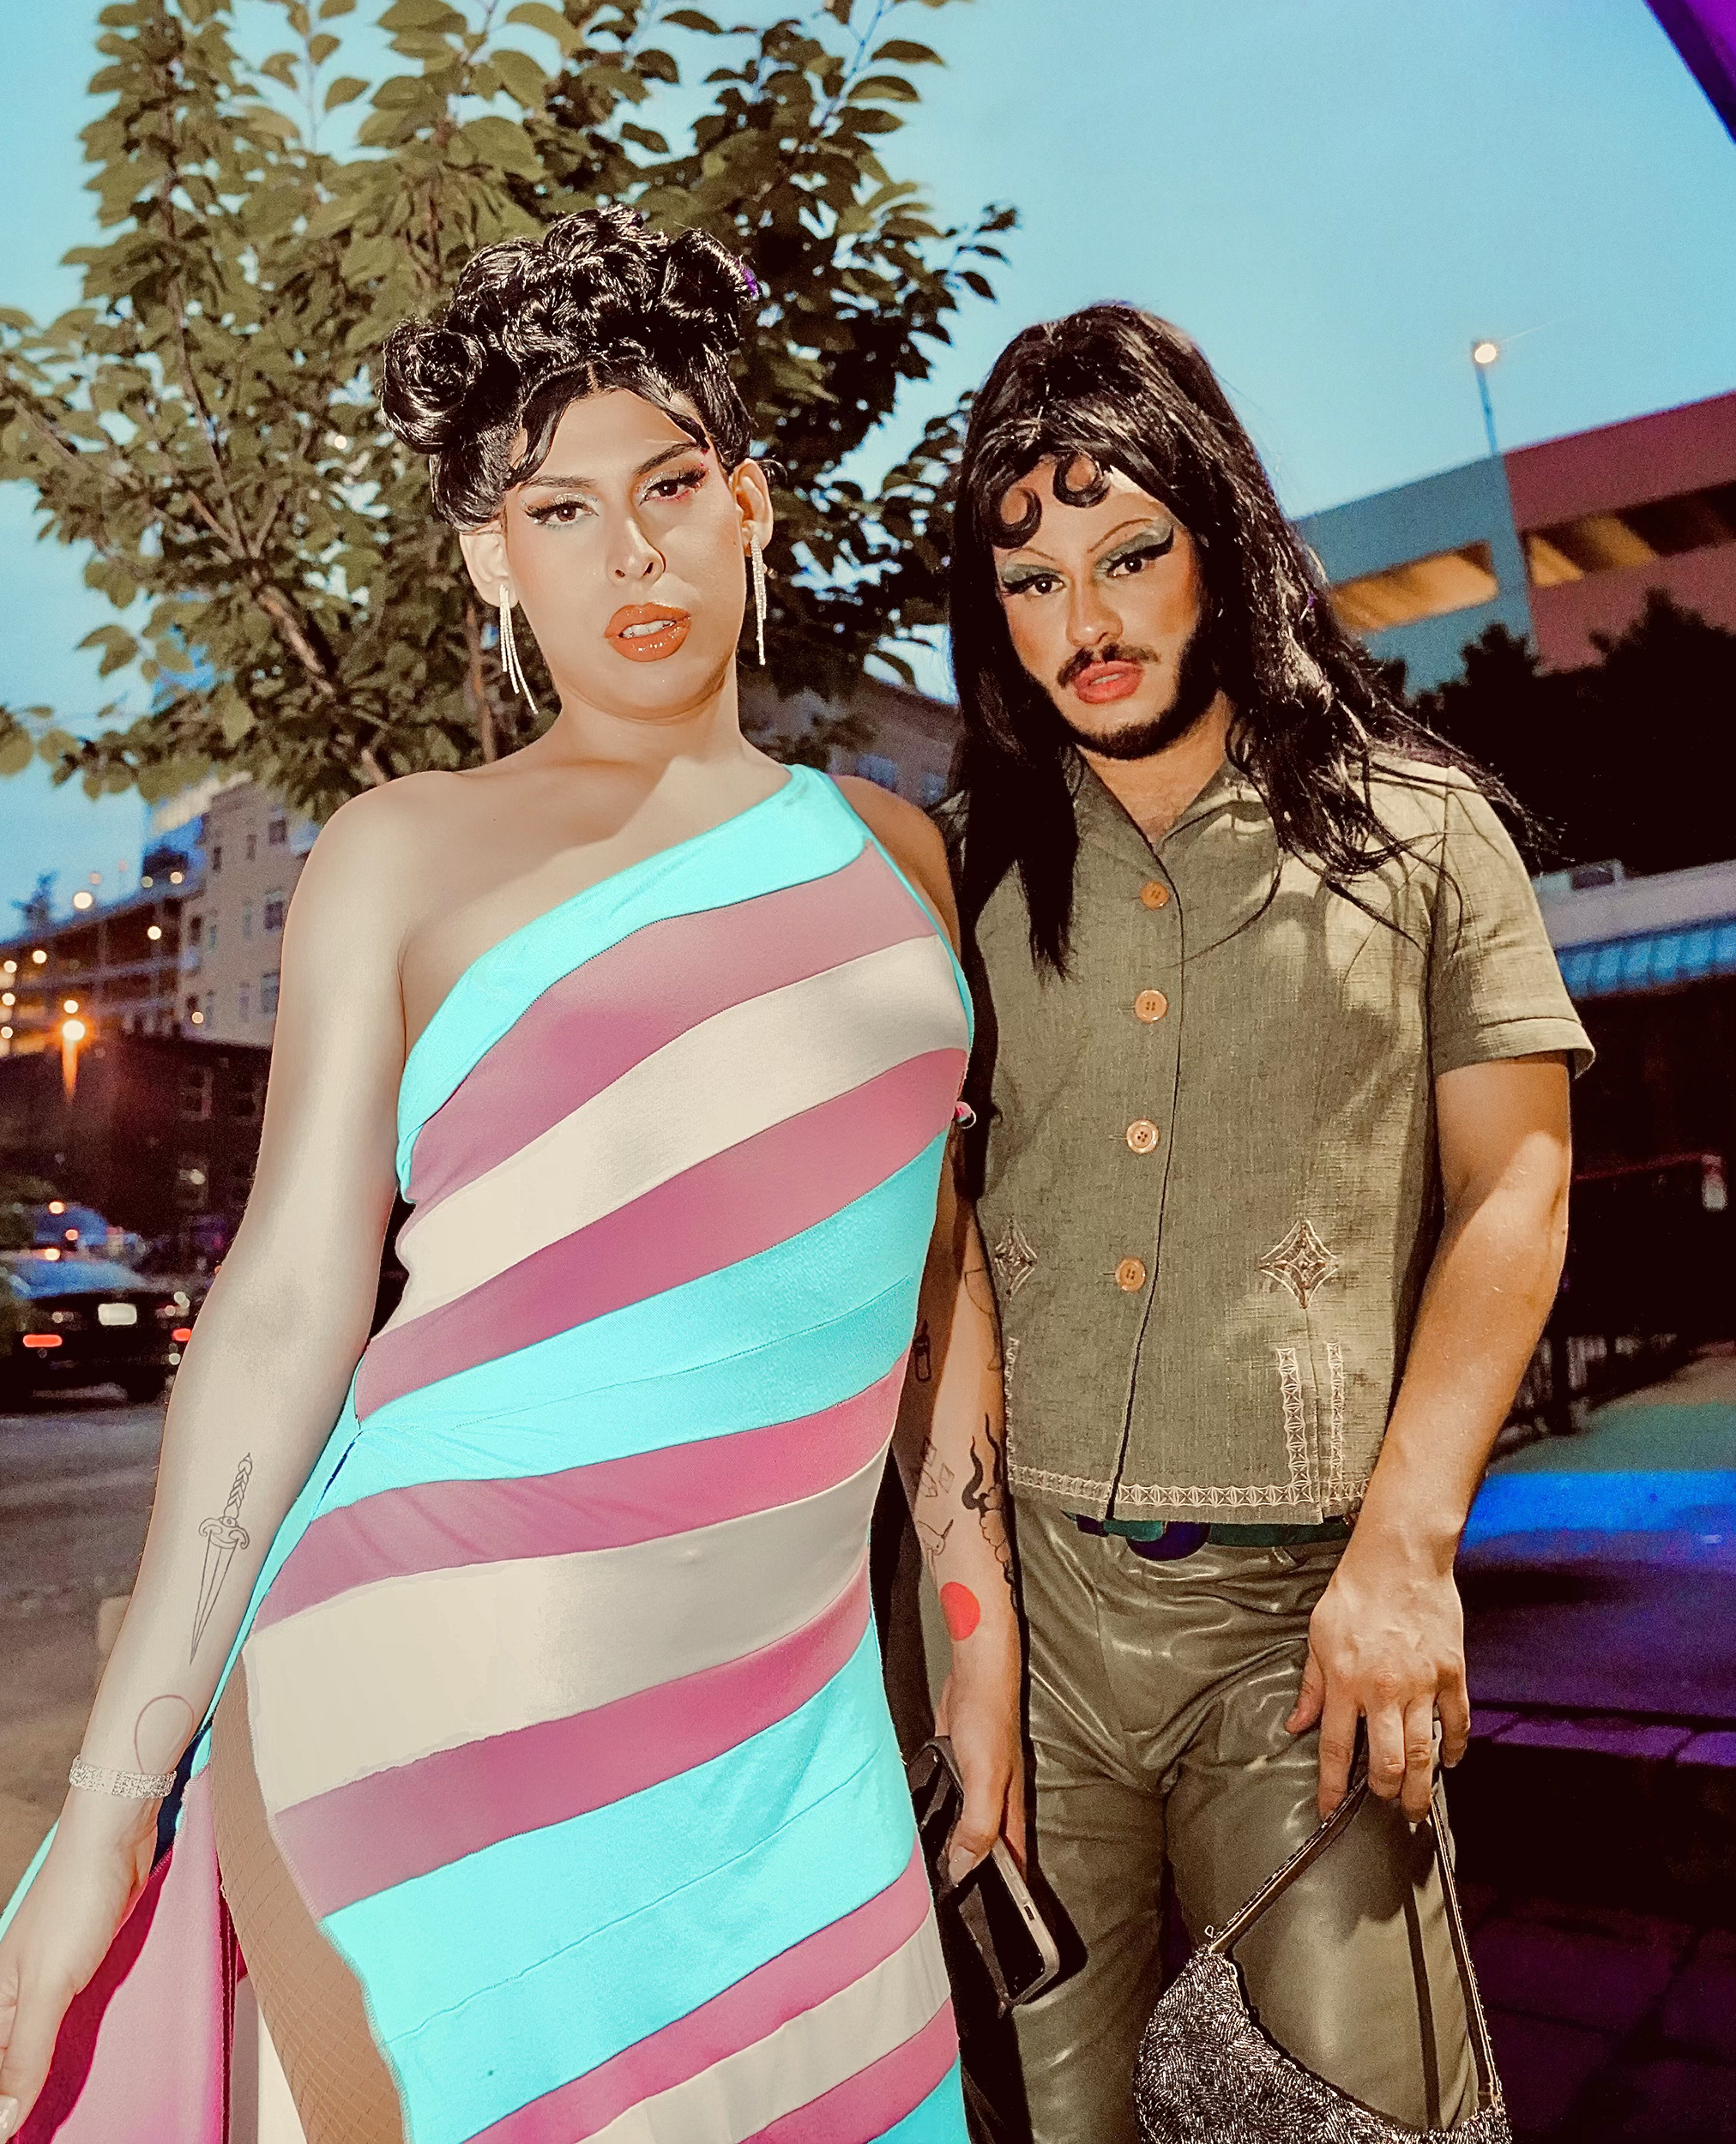 Kali Fuchis and Miss B. Haven pose together in full drag, Fuchis is wearing a green textured shirt with leather pants and Miss B. Haven is wearing a blue and pink-striped dress.